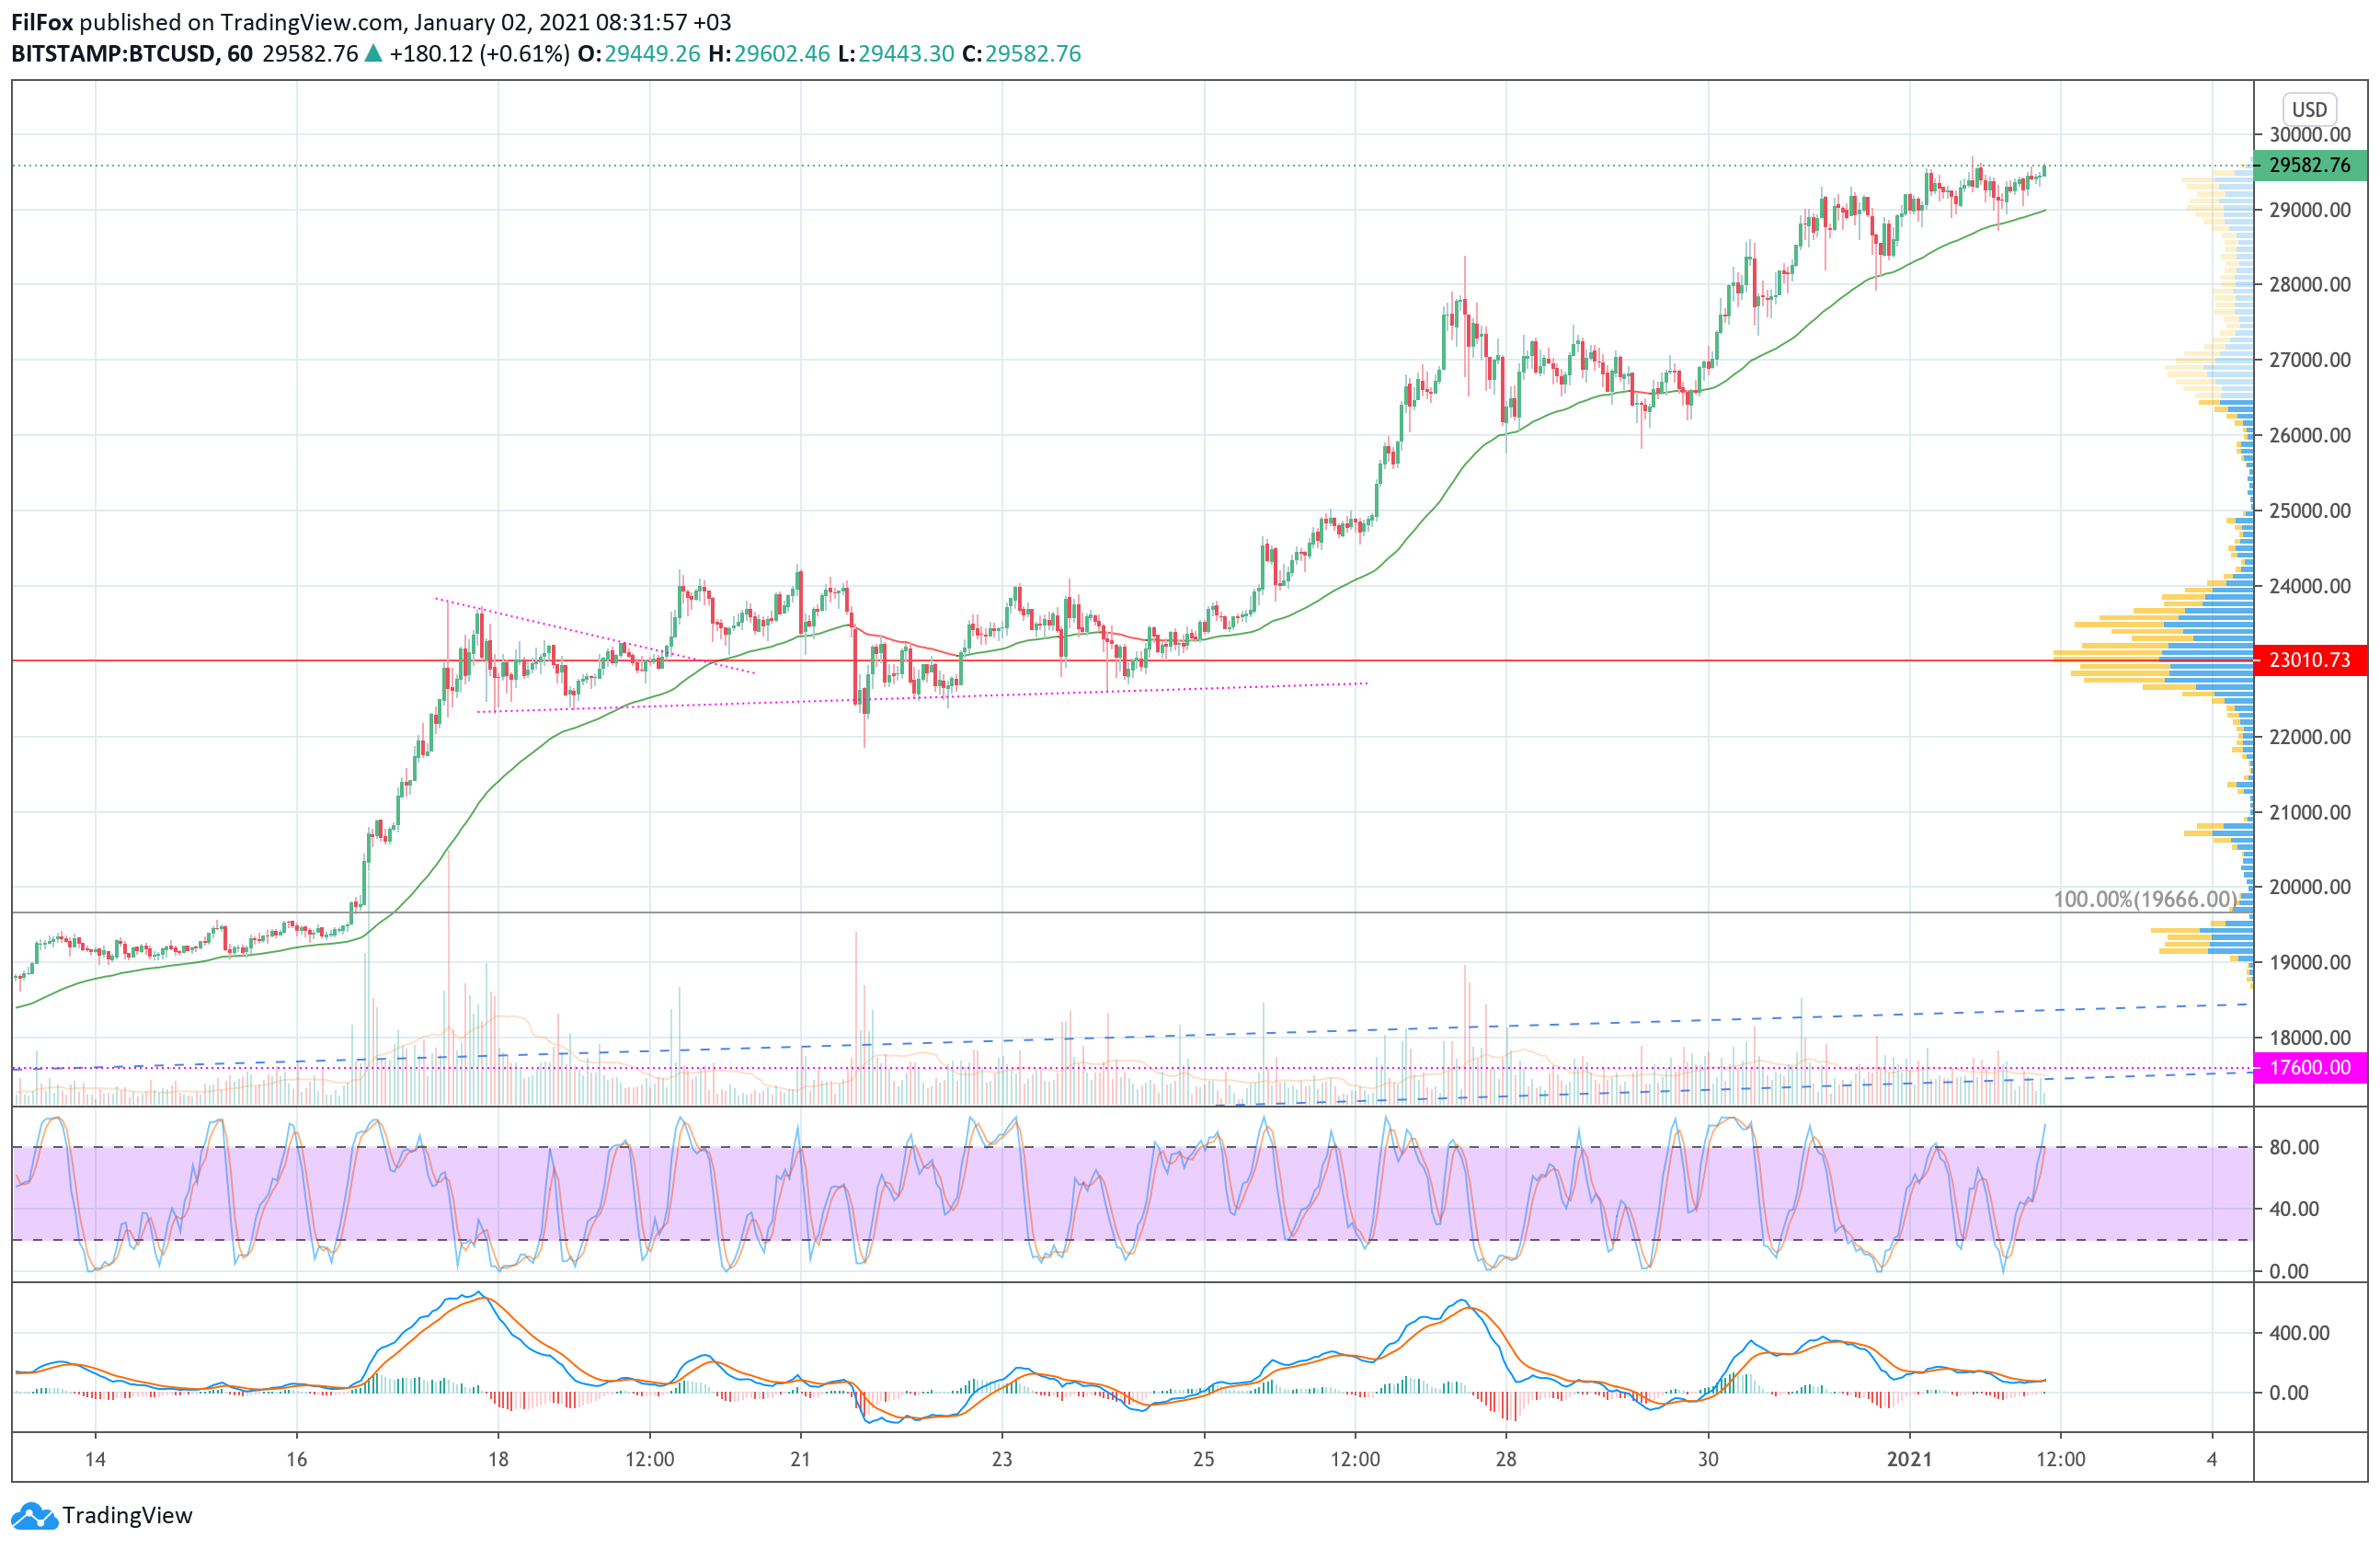 Analysis of prices for Bitcoin, Ethereum, Ripple for 01/02/2021